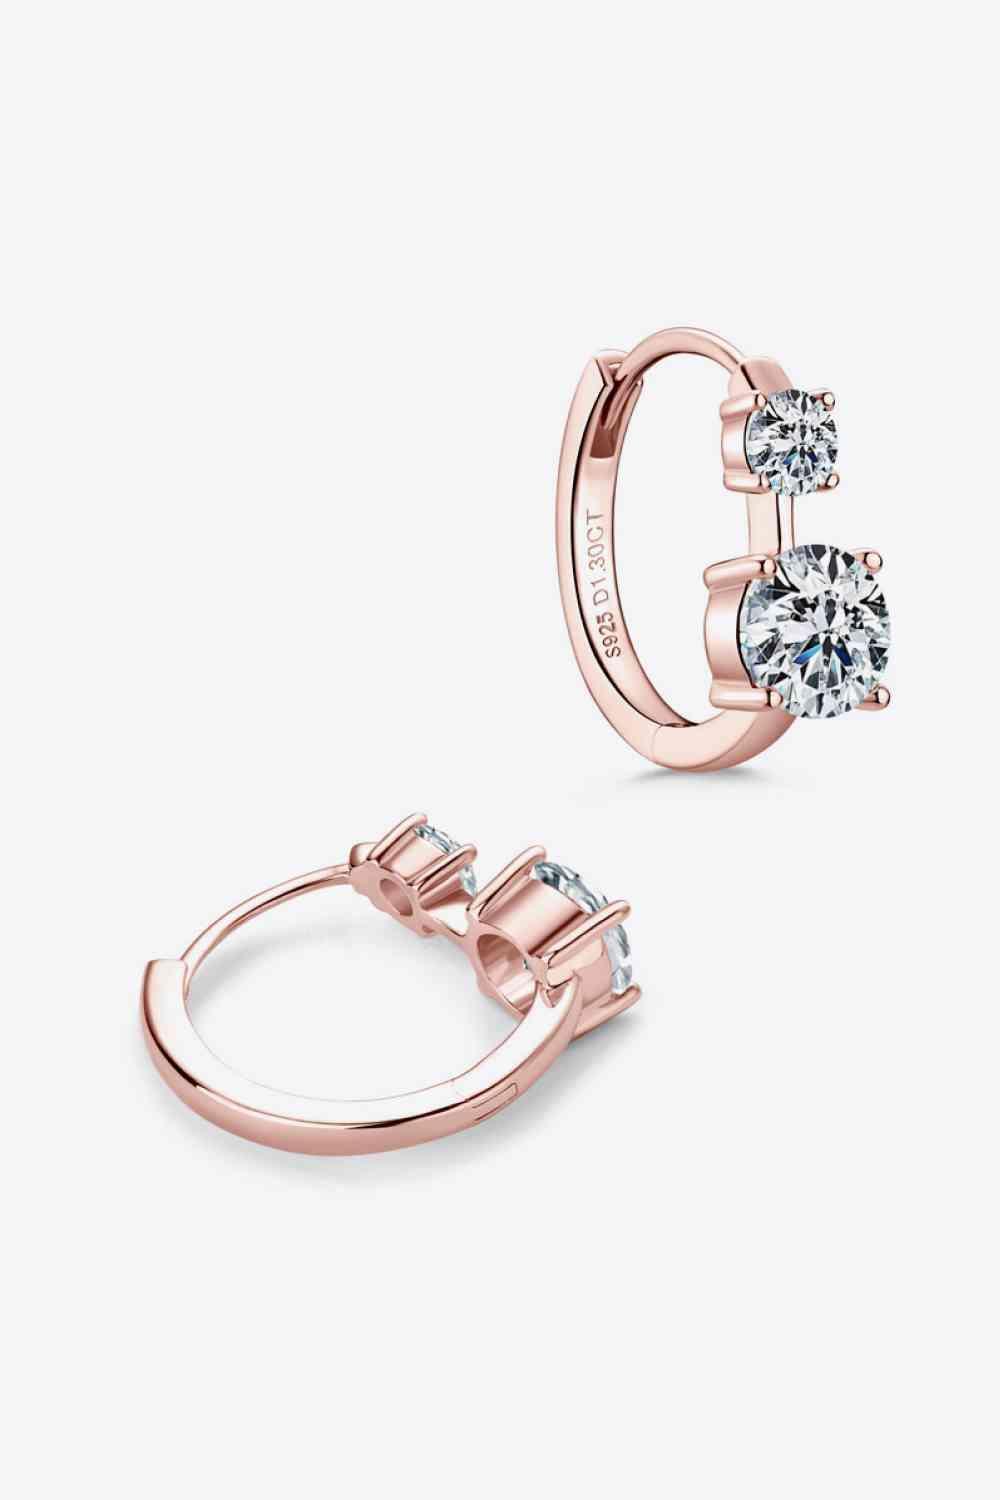 a pair of rose gold earrings with diamonds